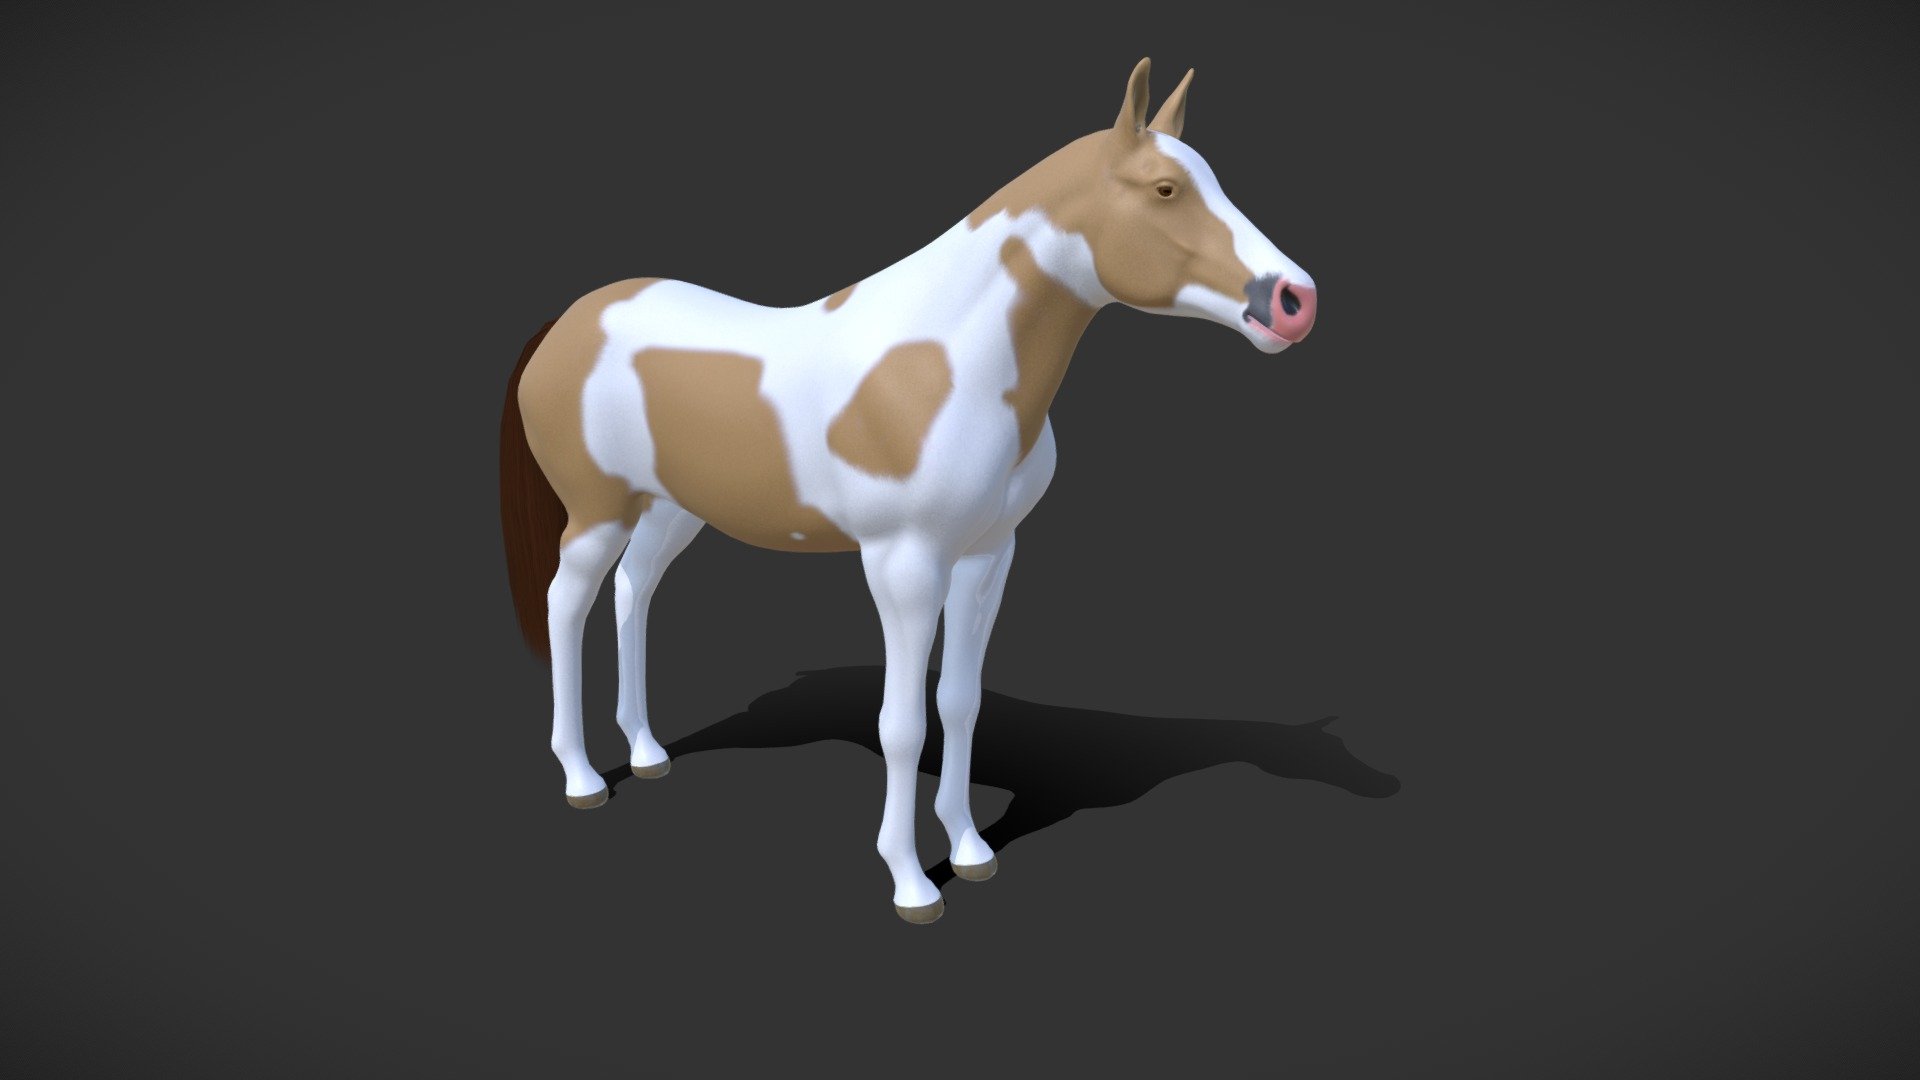 Horse for the D.N.M

Model by: Holden Williams (Updated on 8/21/2018)

Modeler's notes: &ldquo;I would love to make it more realistic/make anatomy more visible, but I'm in a hurry right now. The texture needs a lot of work too. I am definitely planning on redoing this one later on.